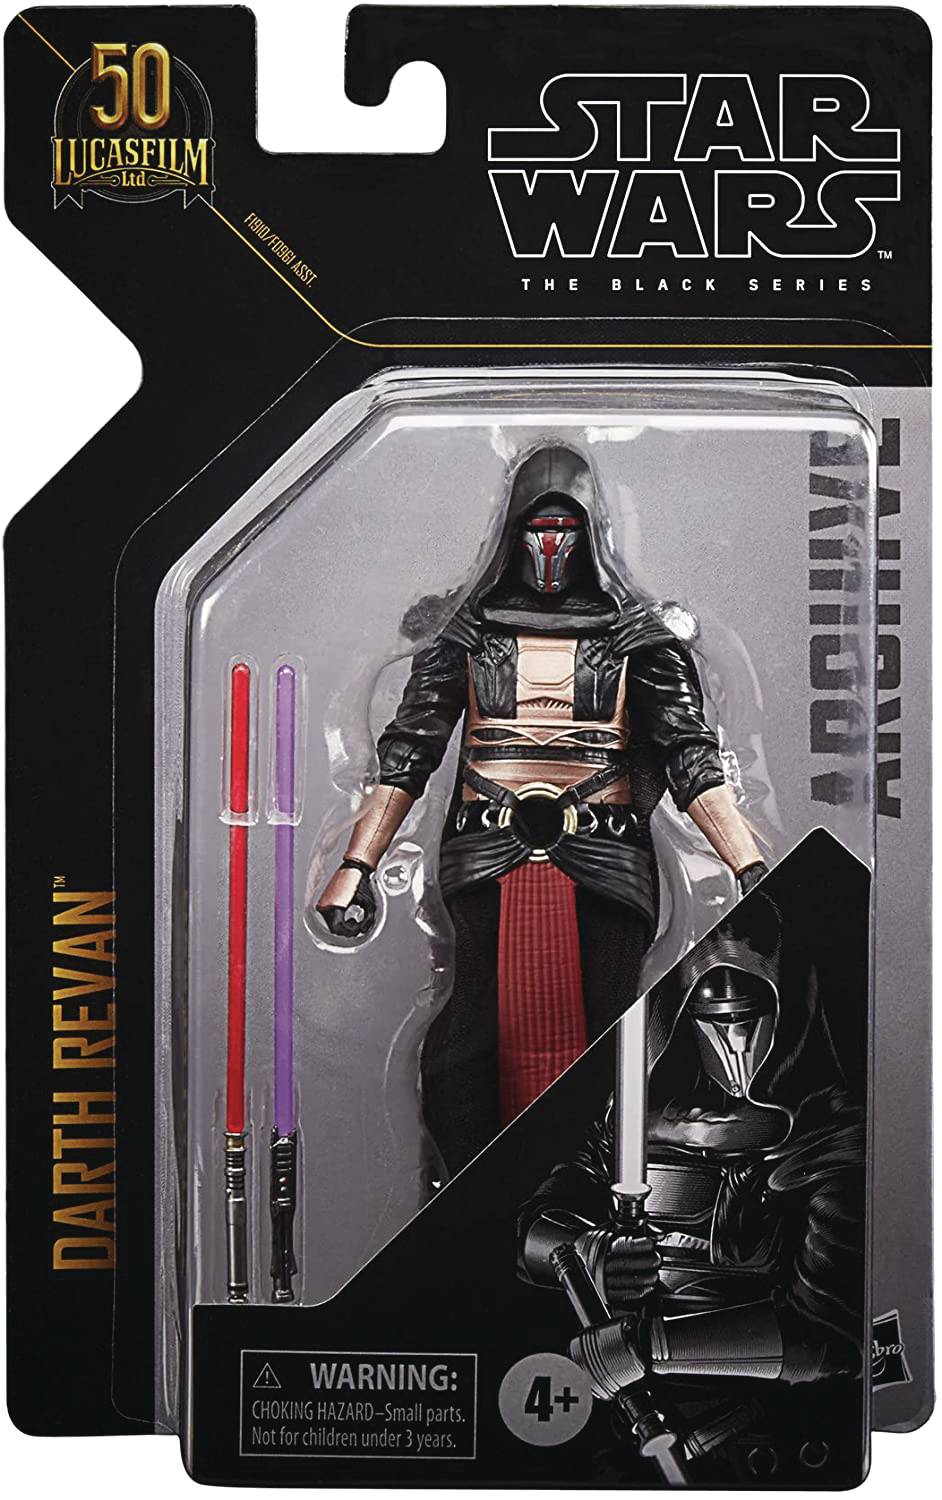 Star Wars Black Series ARCHIVES 6IN DARTH REVAN Action Figure limit one